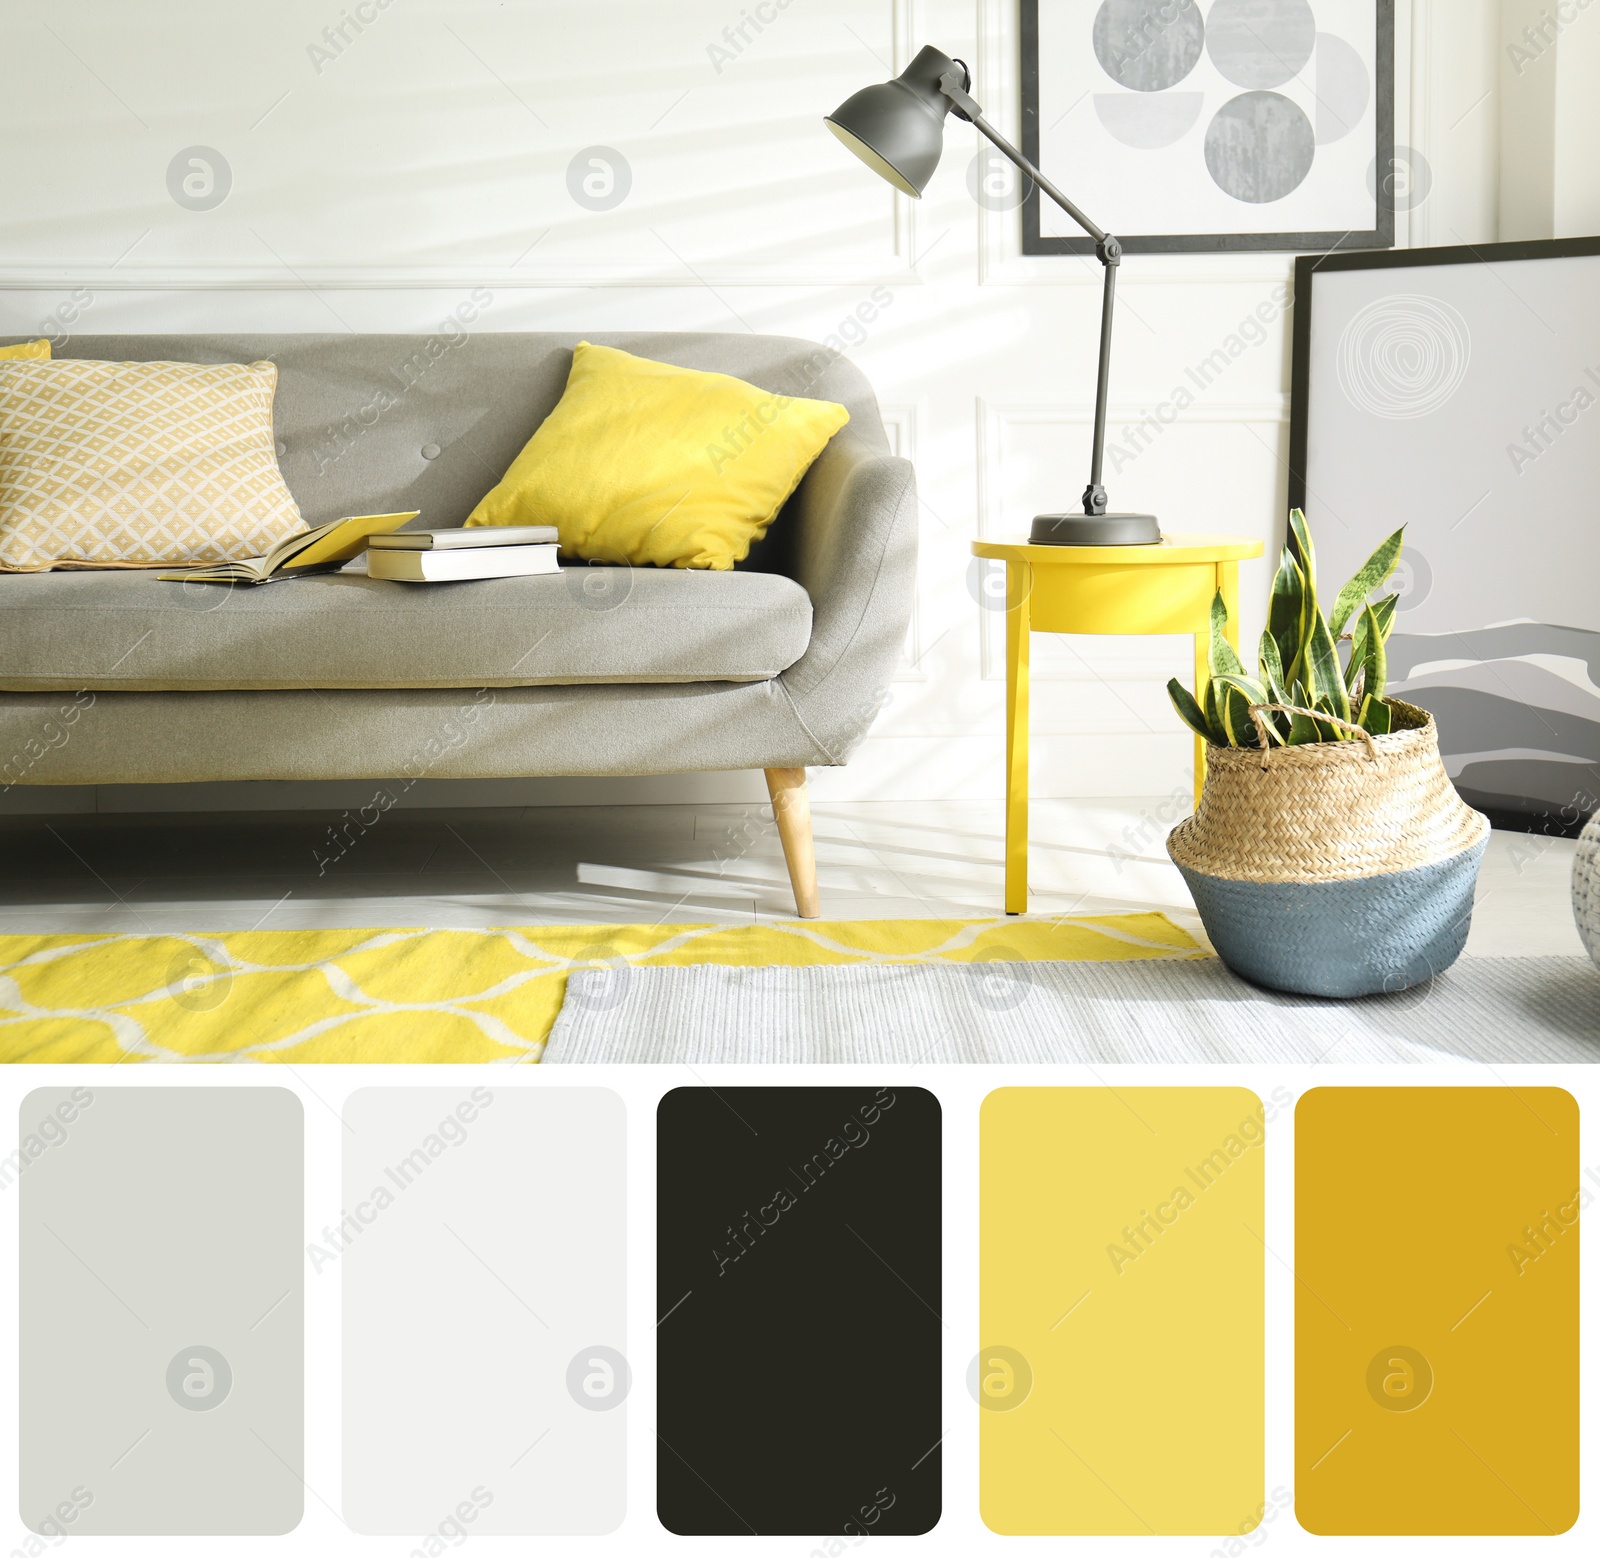 Image of Color palette and photo of stylish living room interior. Collage